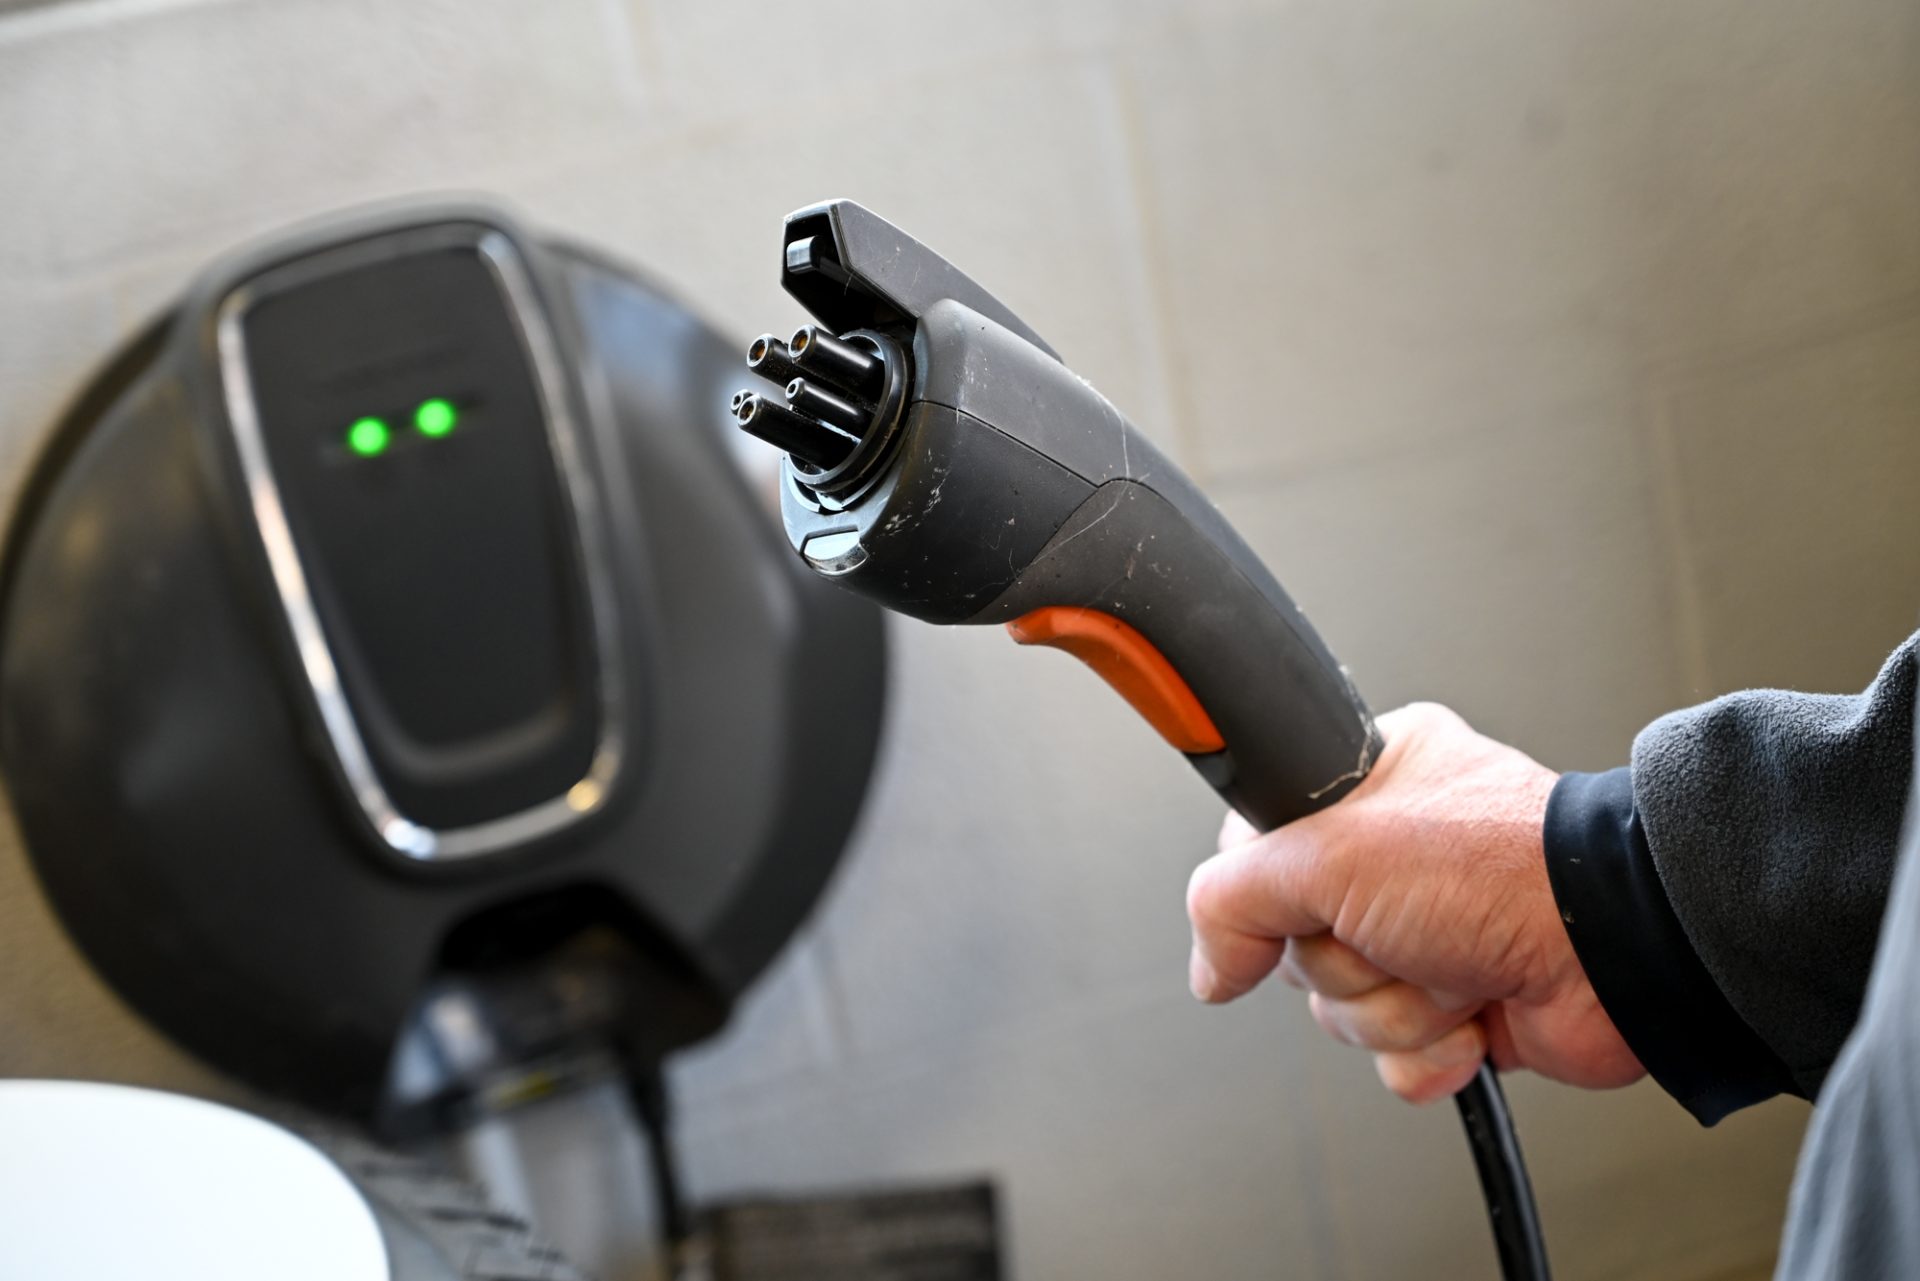 A plug used to charge an electric vehicle at H&H Chevrolet in Shippensburg.